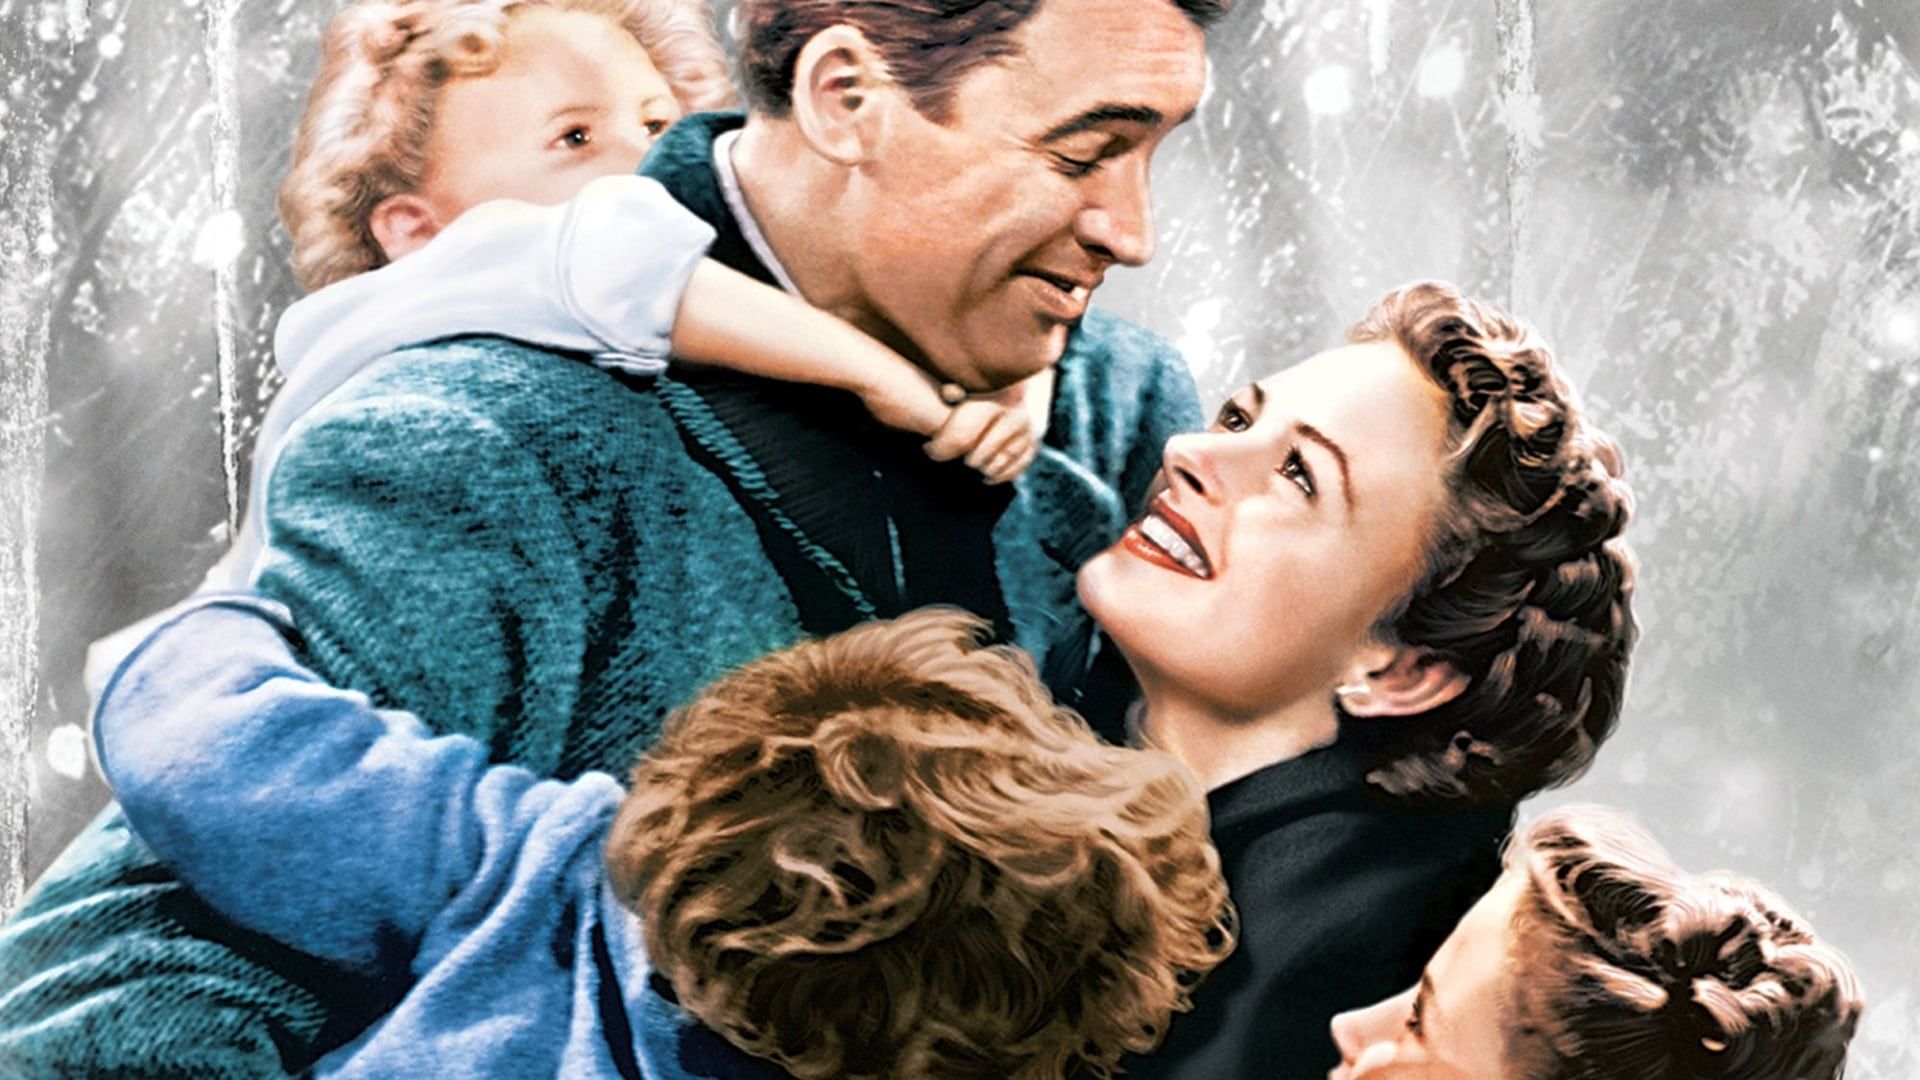 Family from It's A Wonderful Life (1946)